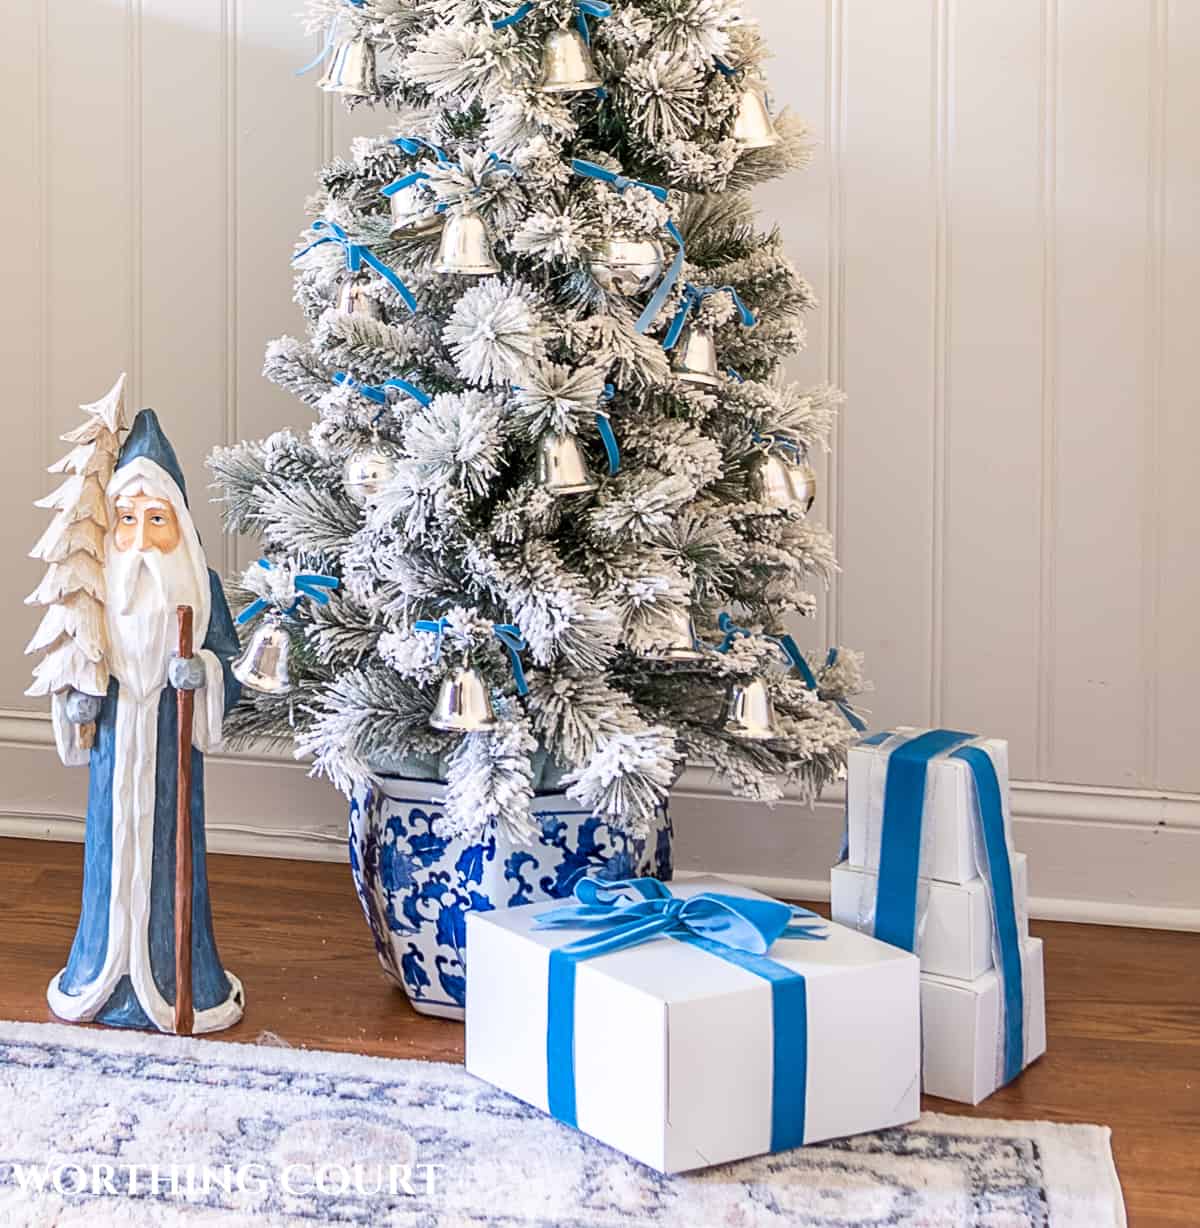 flocked Christmas tree in blue and white porcelain container decorated with French blue and silver ornaments and ribbon